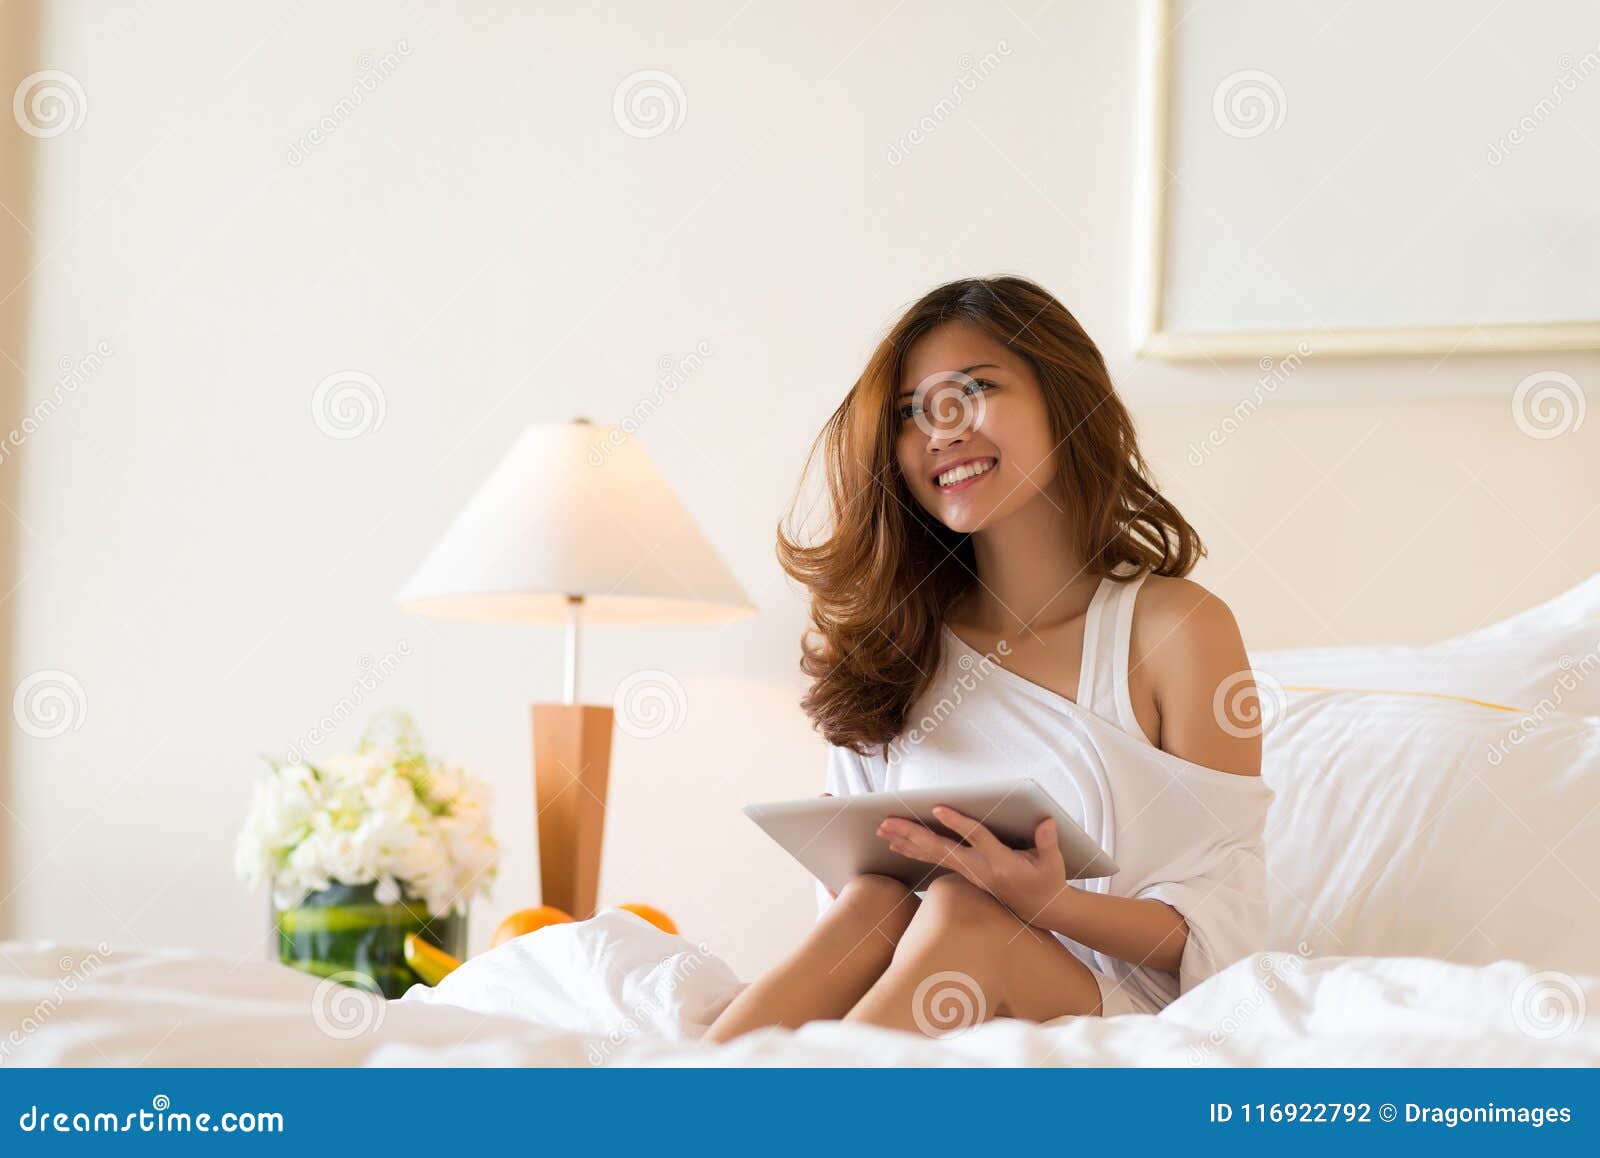 Spending Lazy Weekend at Home Stock Photo Image of resort, vacation